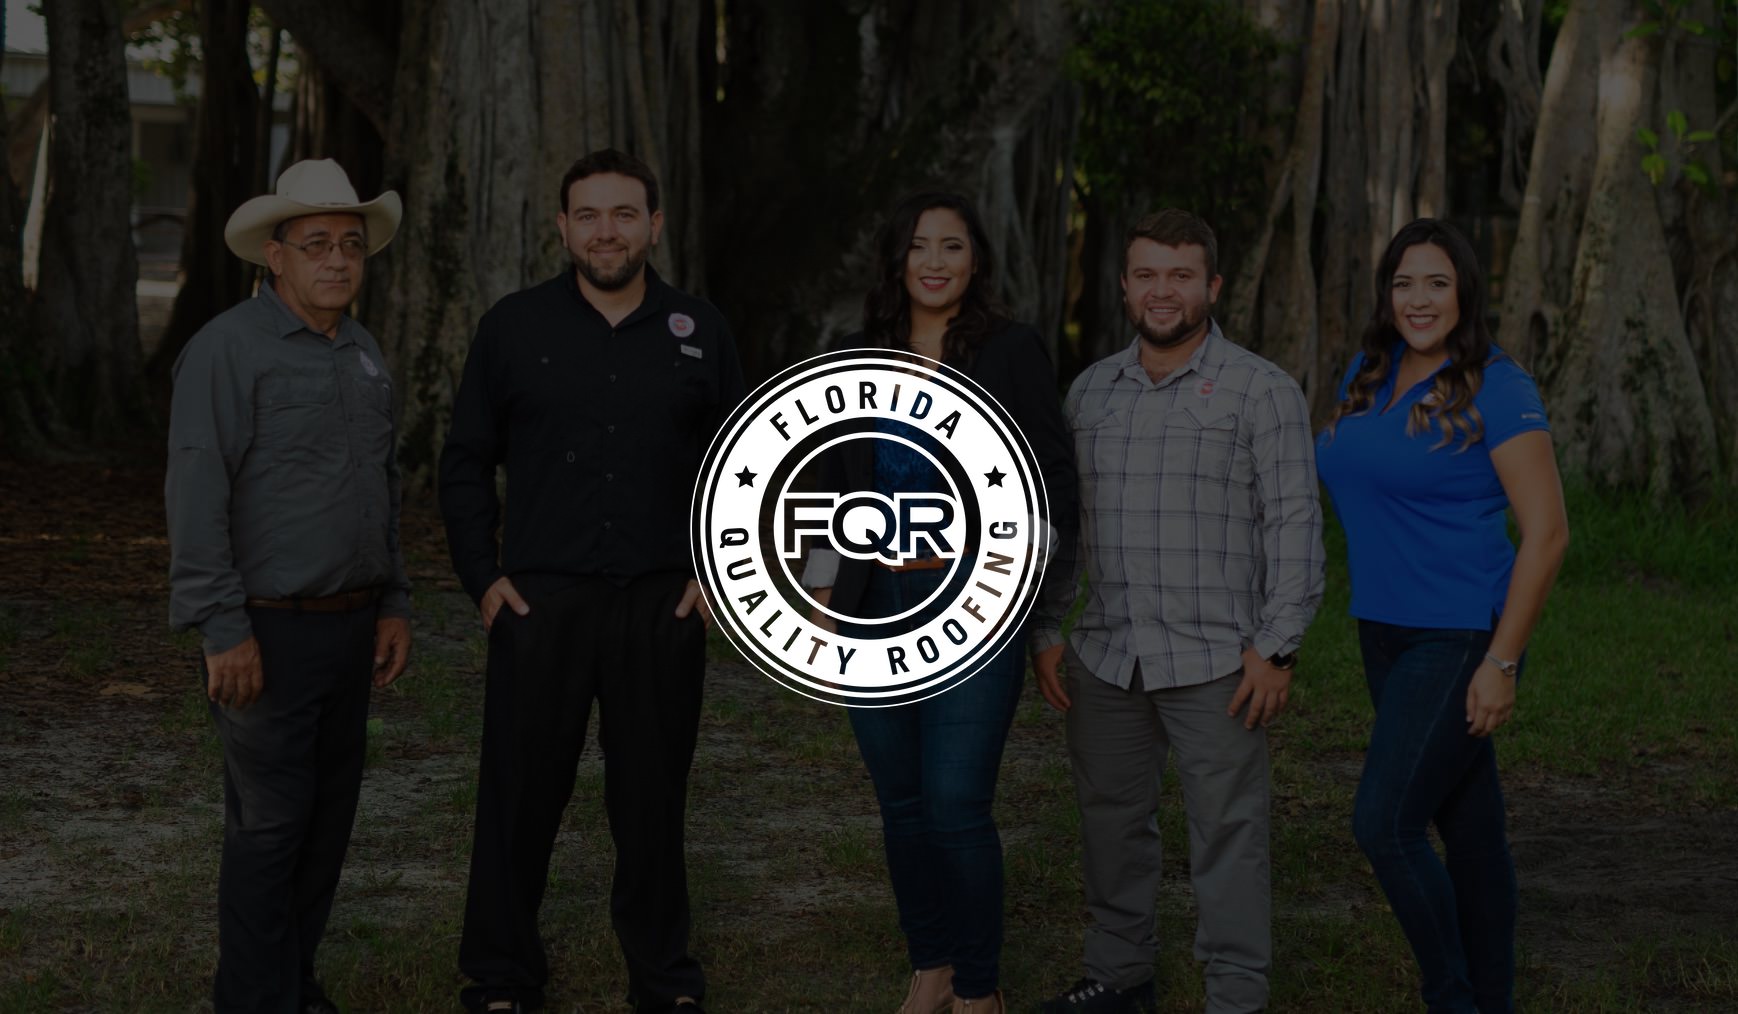 White Florida Quality Roofing logo on dimmed background of group of FQR employees made up of two women and three men posing for a picture